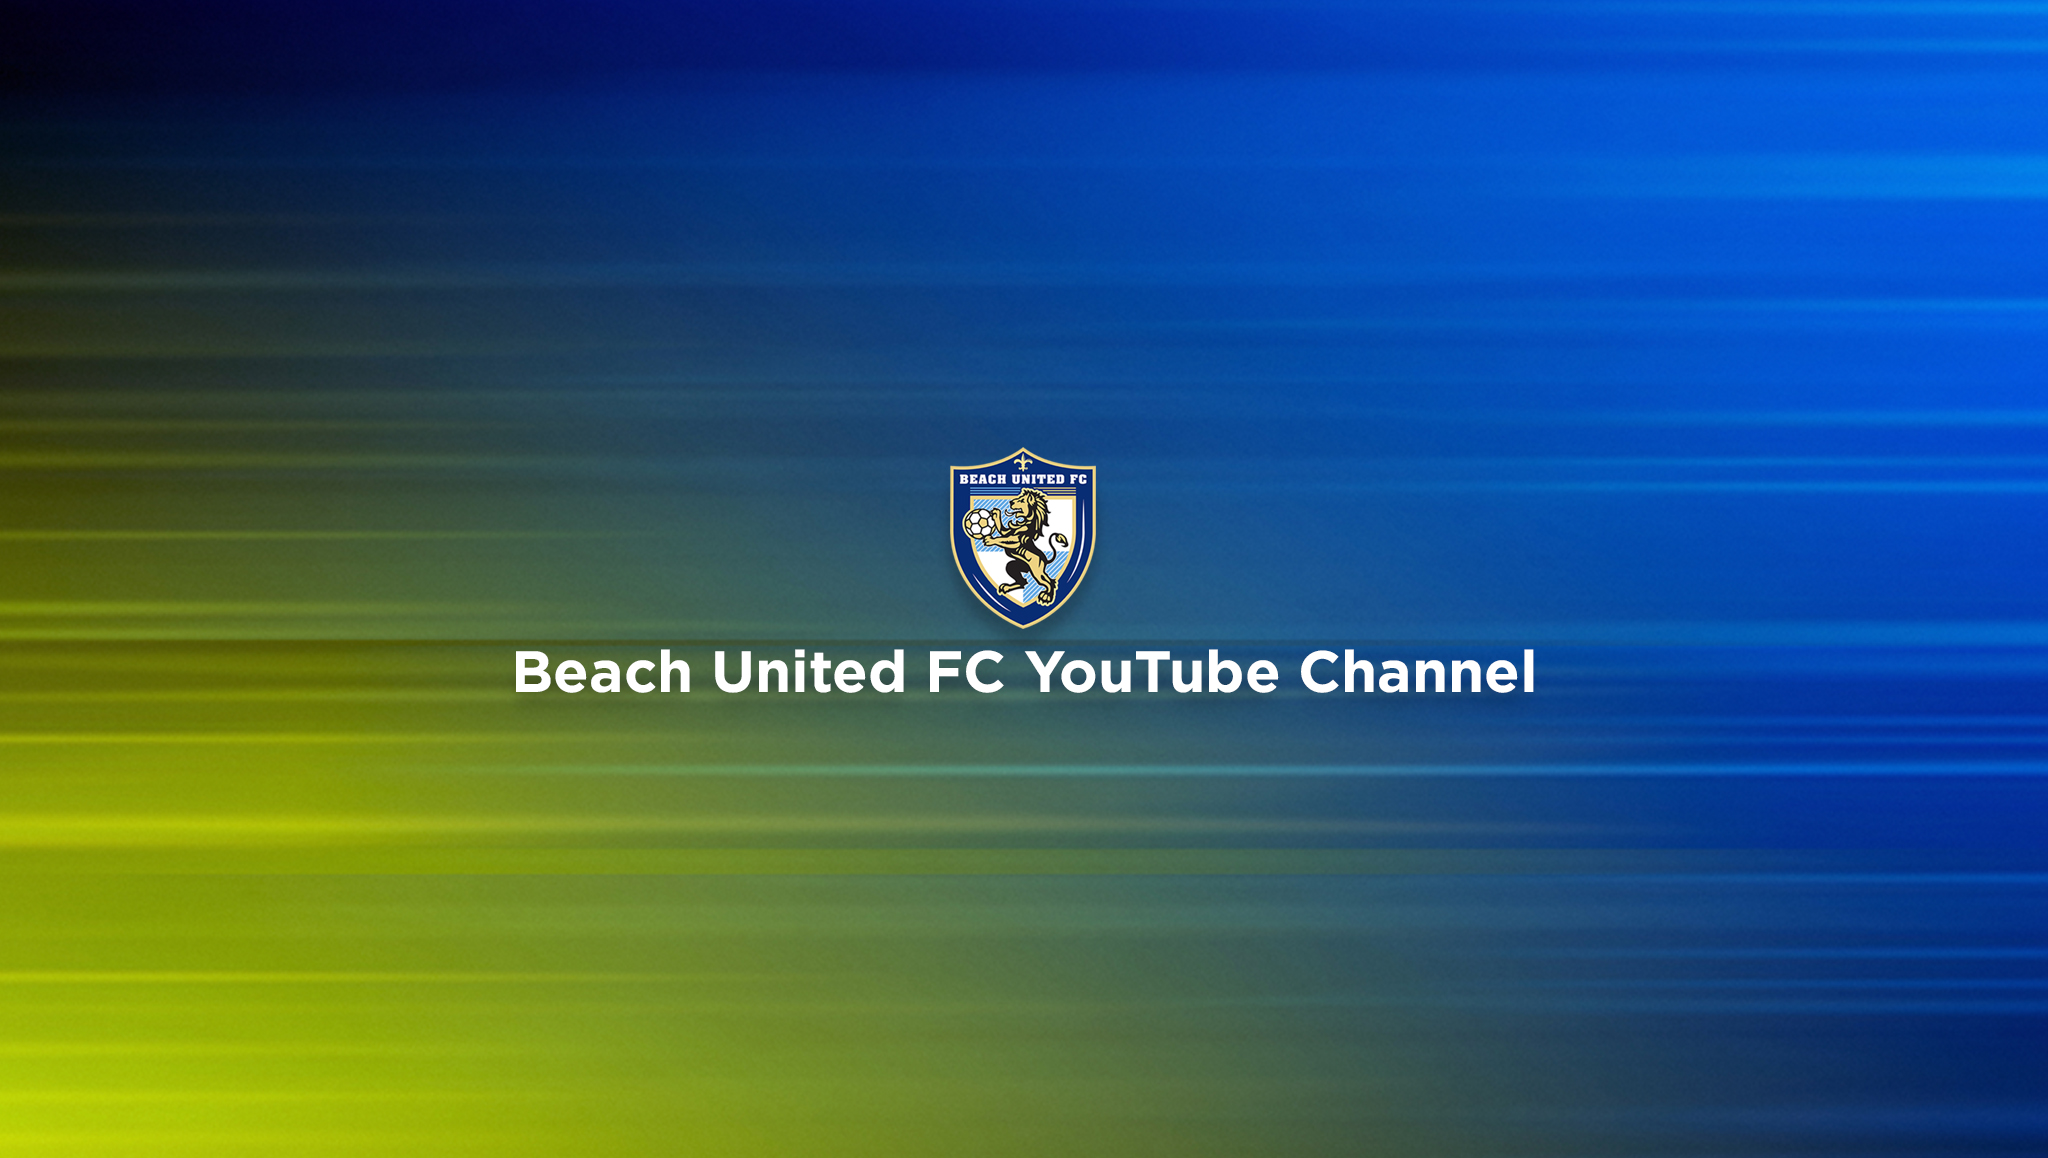 Click Image to visit our BUFC YouTube Channel! 